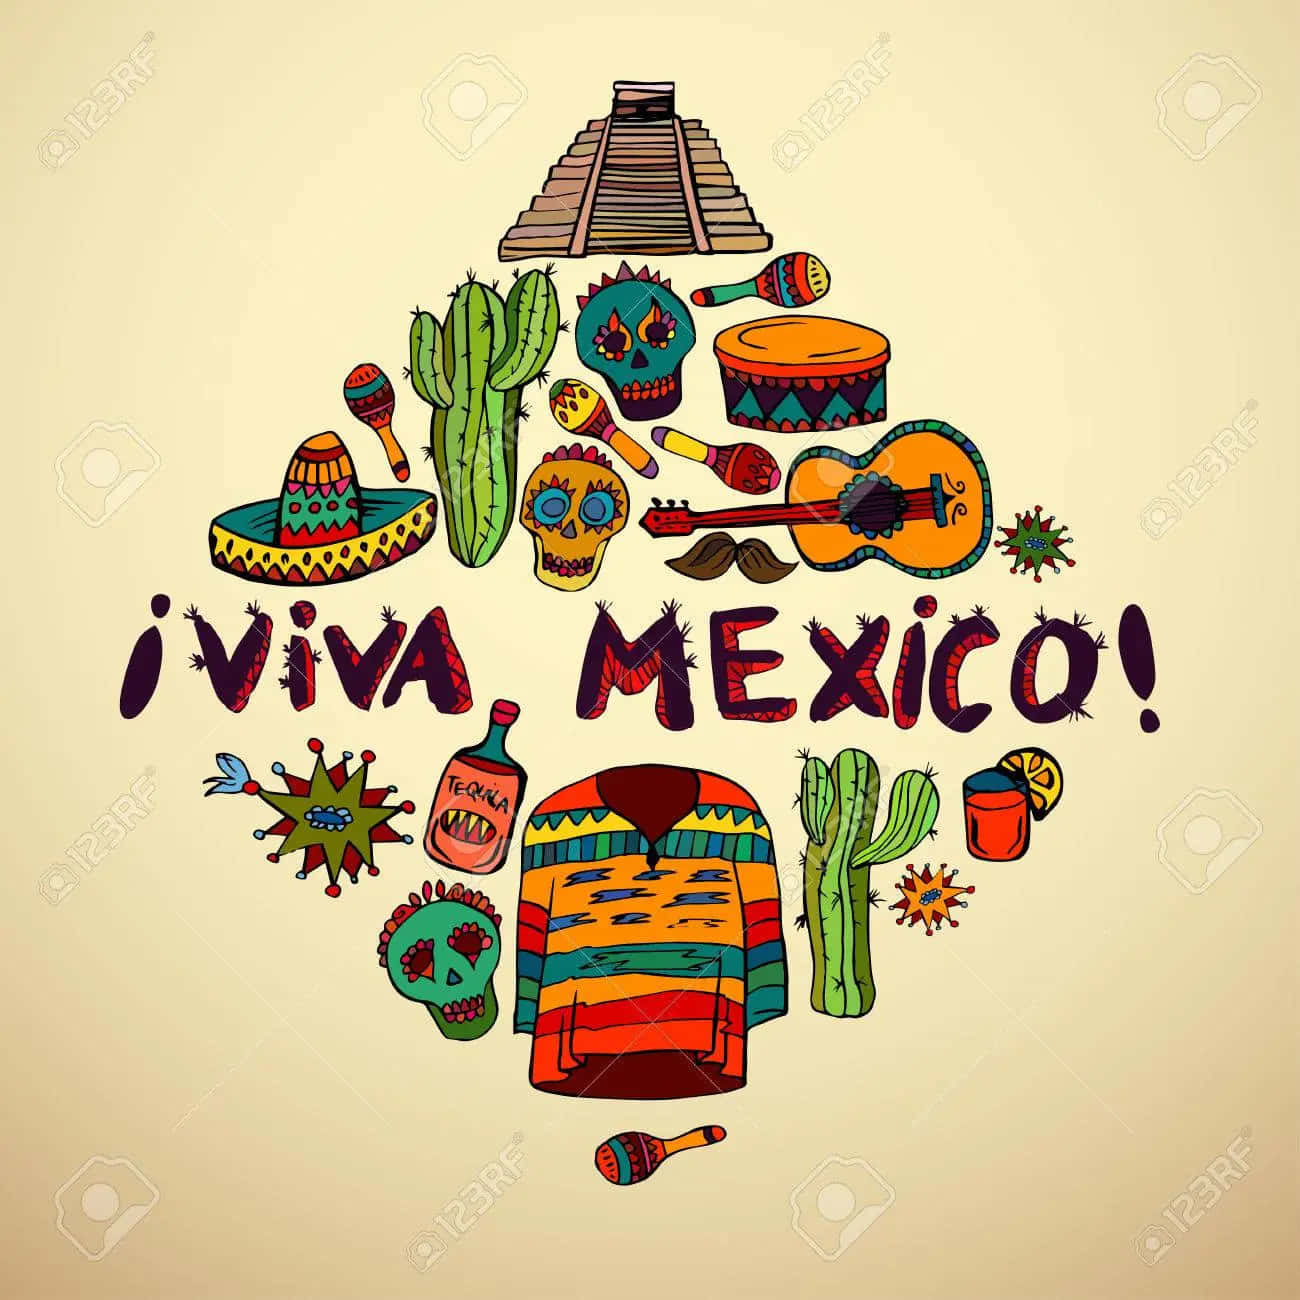 Viva Mexico! Celebrate The Culture, Heritage And Spirit Of This Beautiful Nation. Background